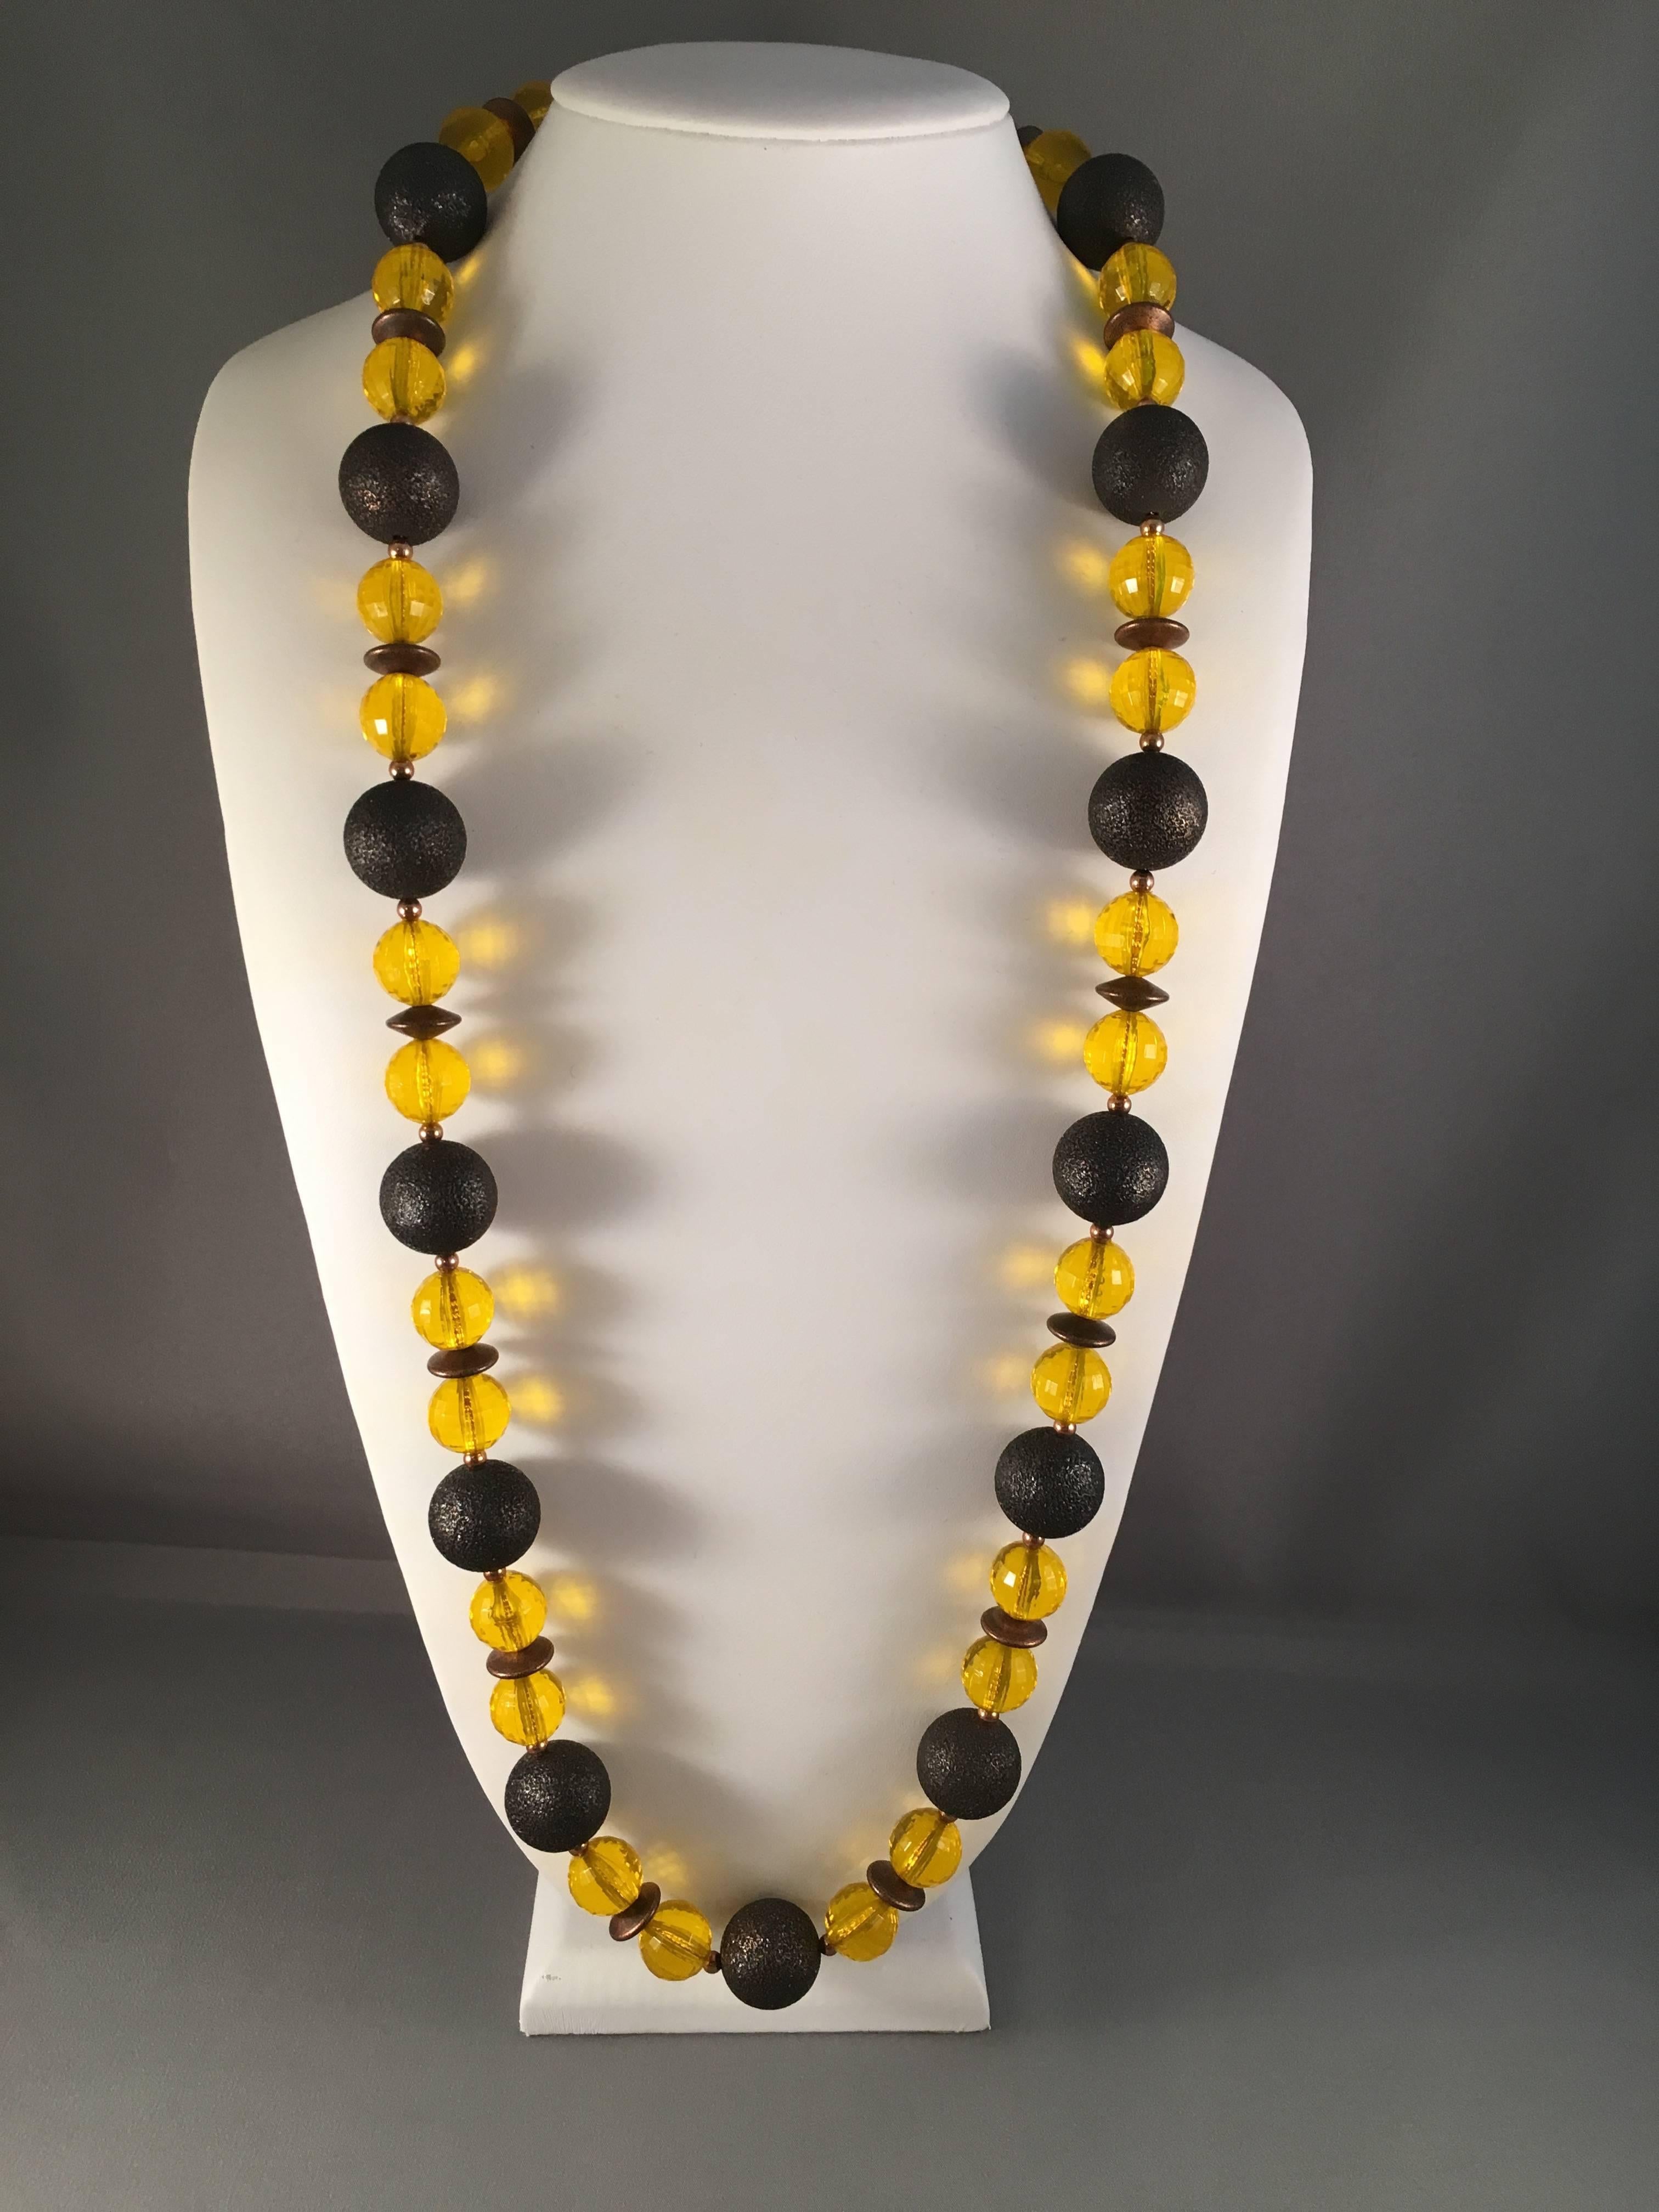 This is a 1970s Yves Saint Laurent metal and lucite beaded necklace. It features yellow faceted lucite and copper toned metal beads strung on a goldtone chain. The necklace measures 35" long and is in excellent condition. The closure features a